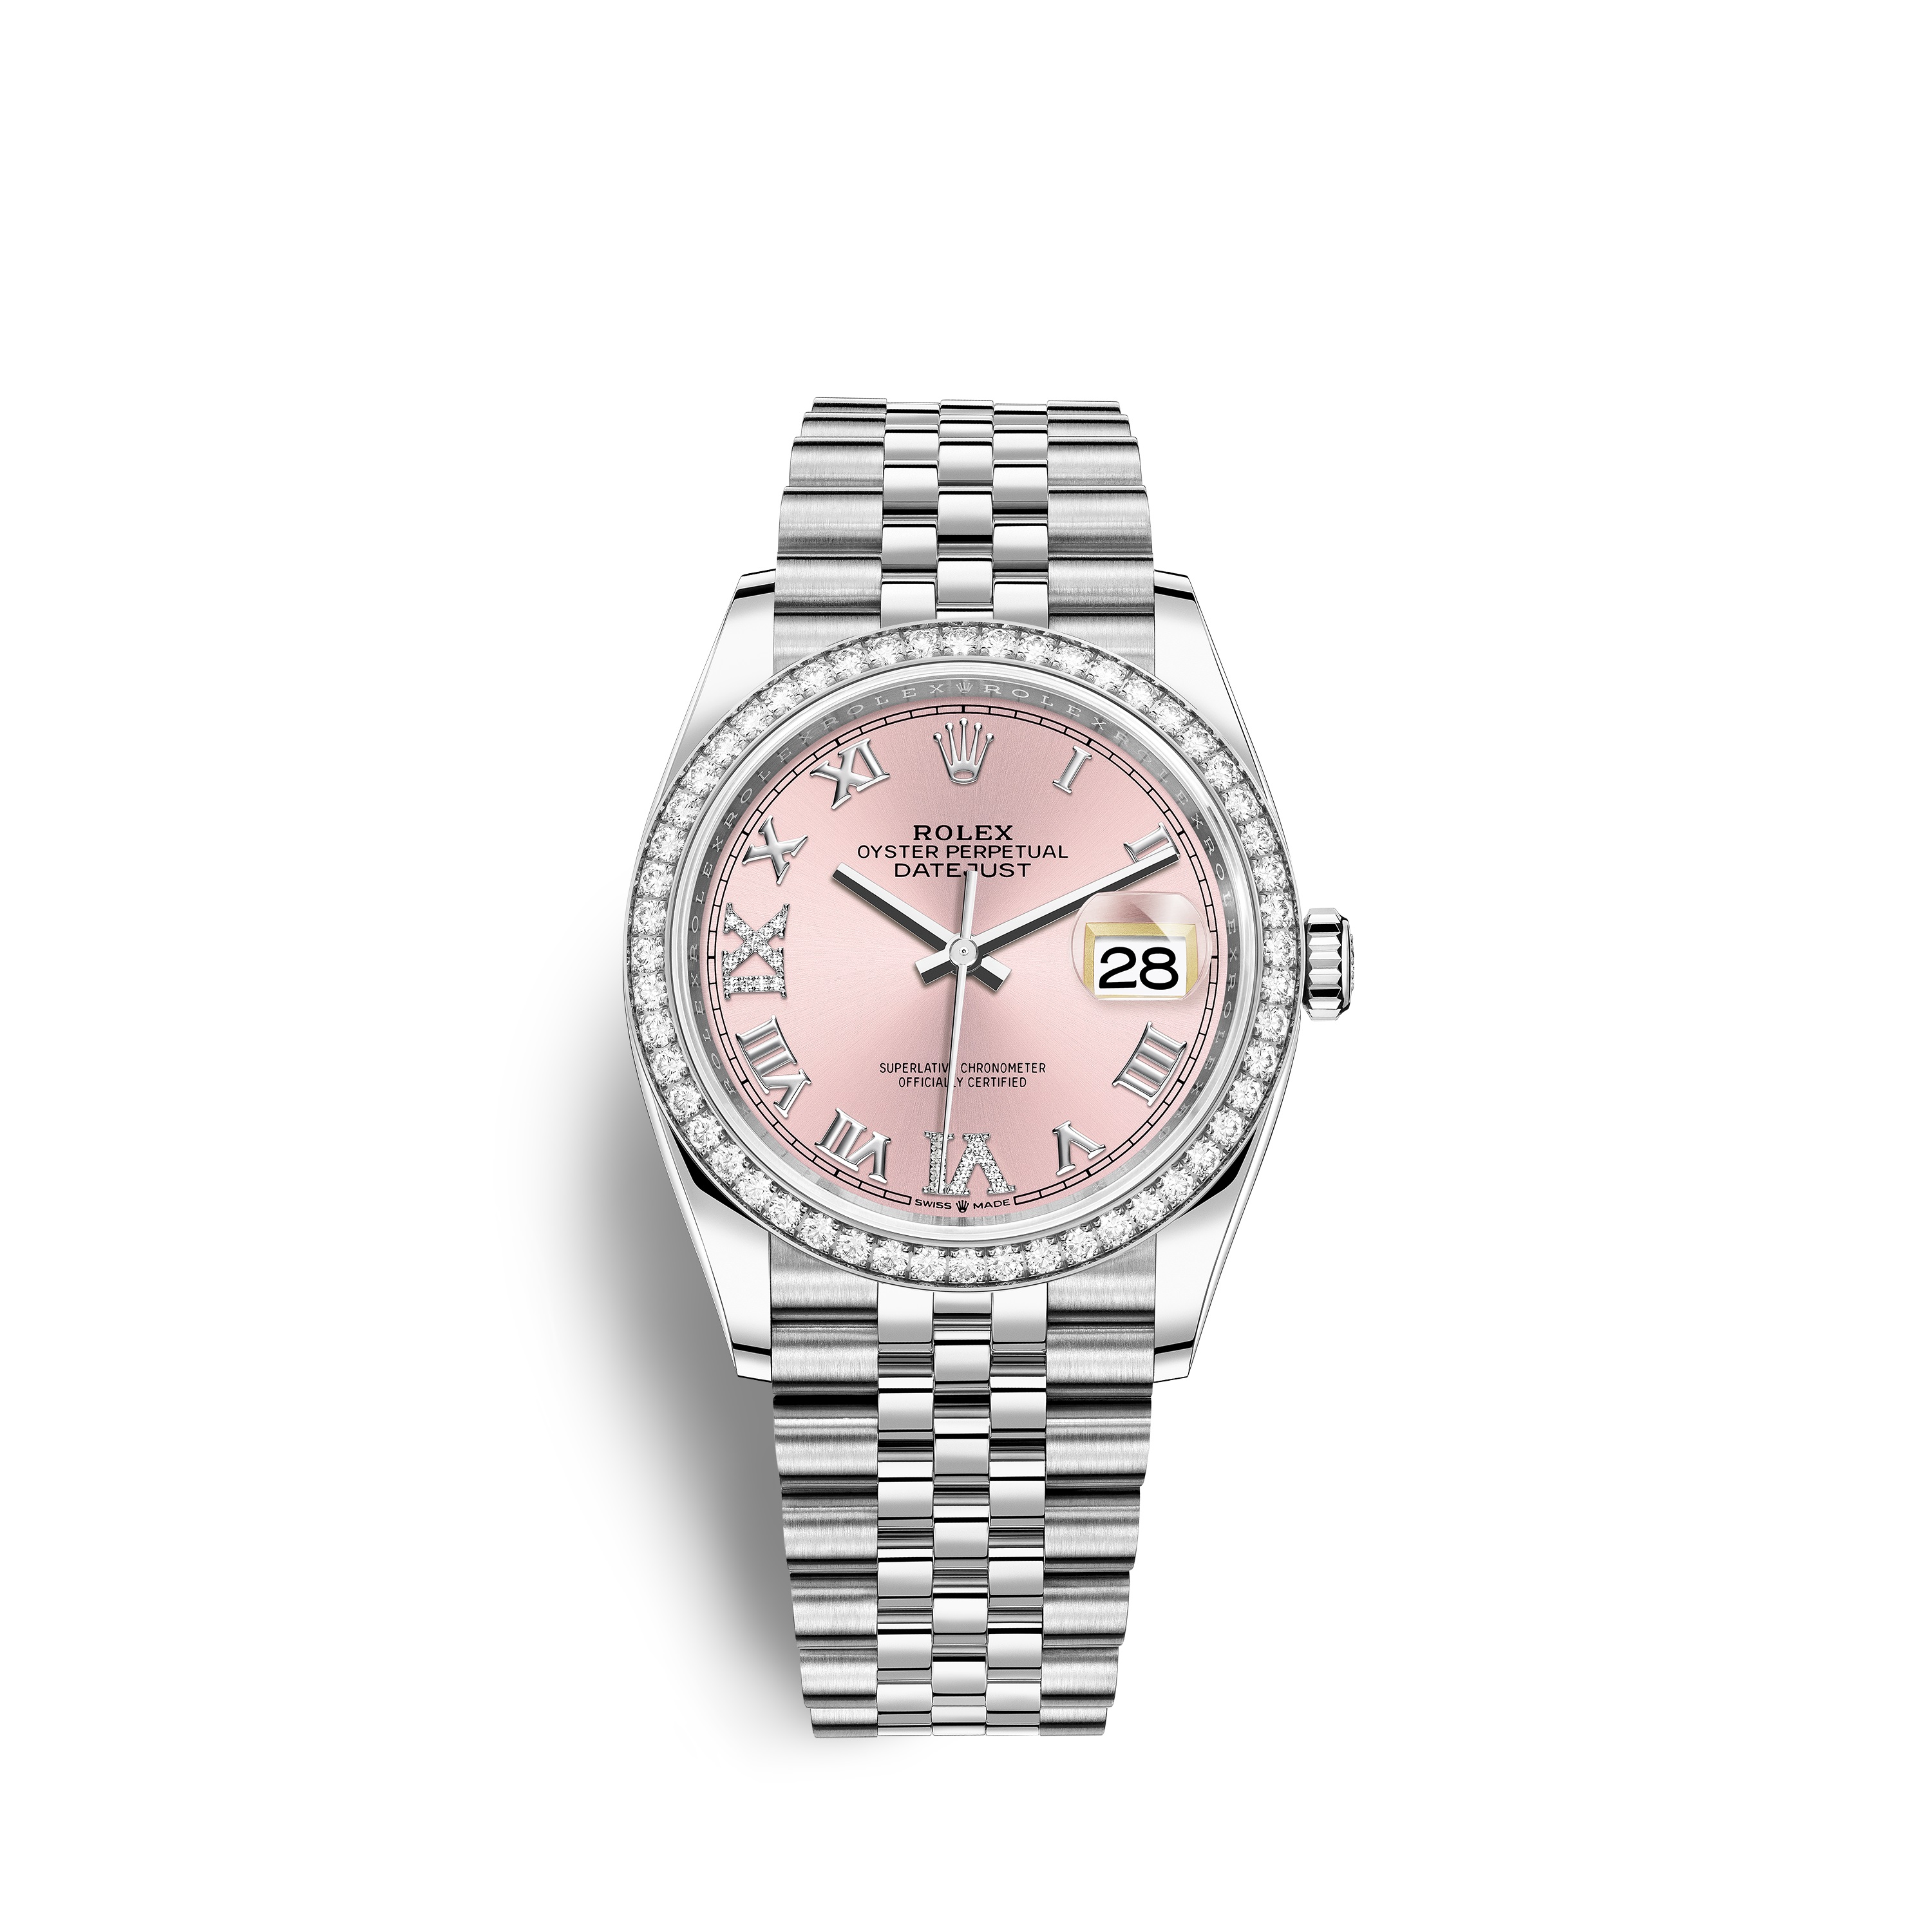 Datejust 36 126284RBR White Gold, Stainless Steel & Diamonds Watch (Pink Set with Diamonds)